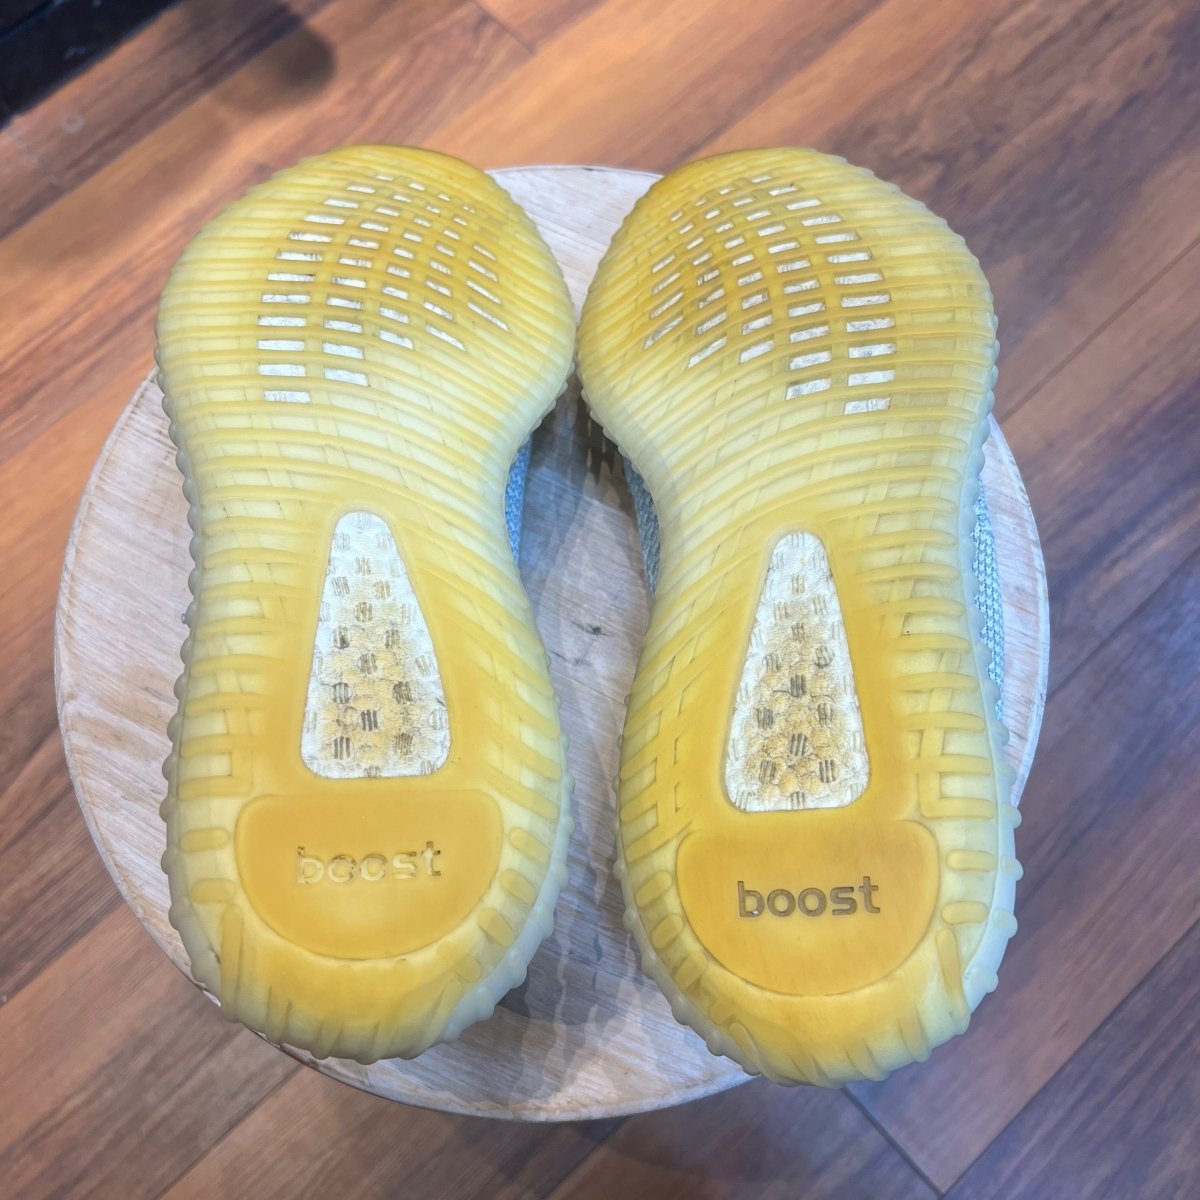 Yeezy Boost 350 V2 Cloud White Gently Enjoyed (Used) Men 13 - Rep Box - Low Sneaker - Yeezy - Jawns on Fire - sneakers